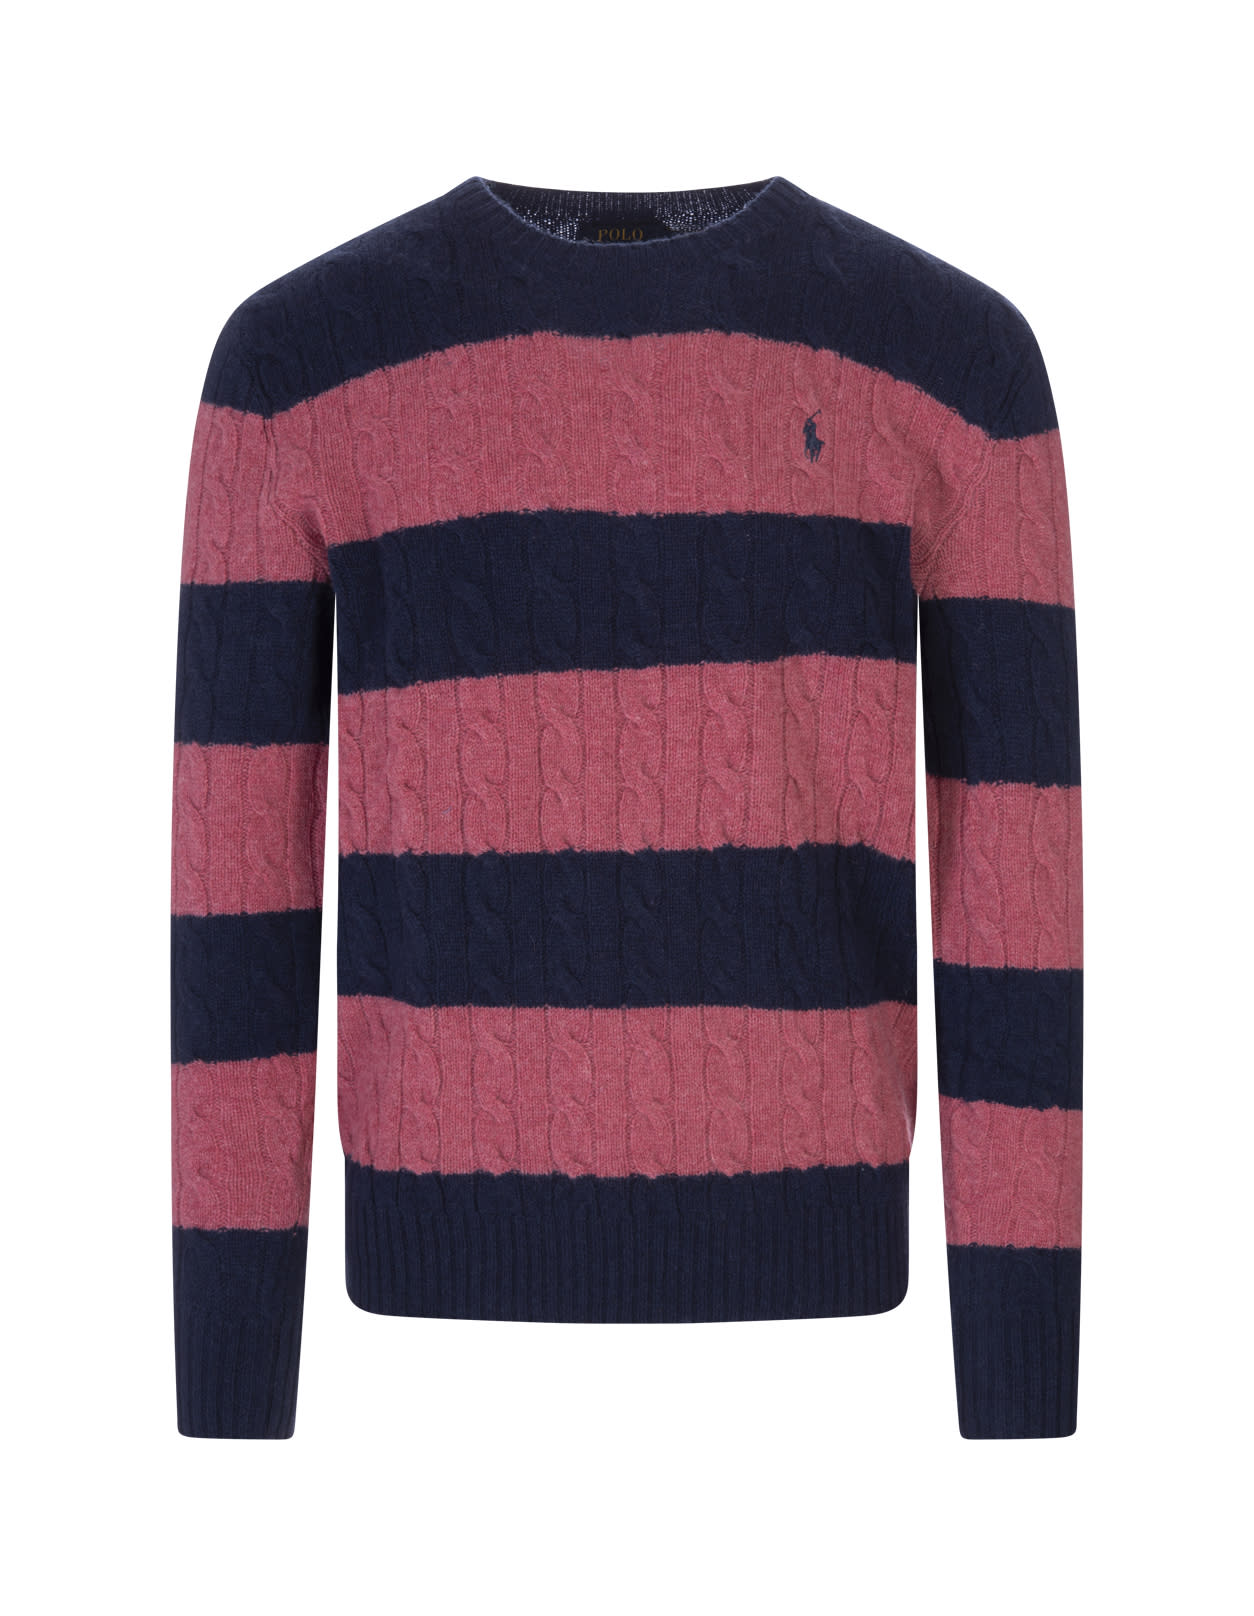 Ralph Lauren Man Pink And Navy Blue Braided Sweater With Striped Pattern